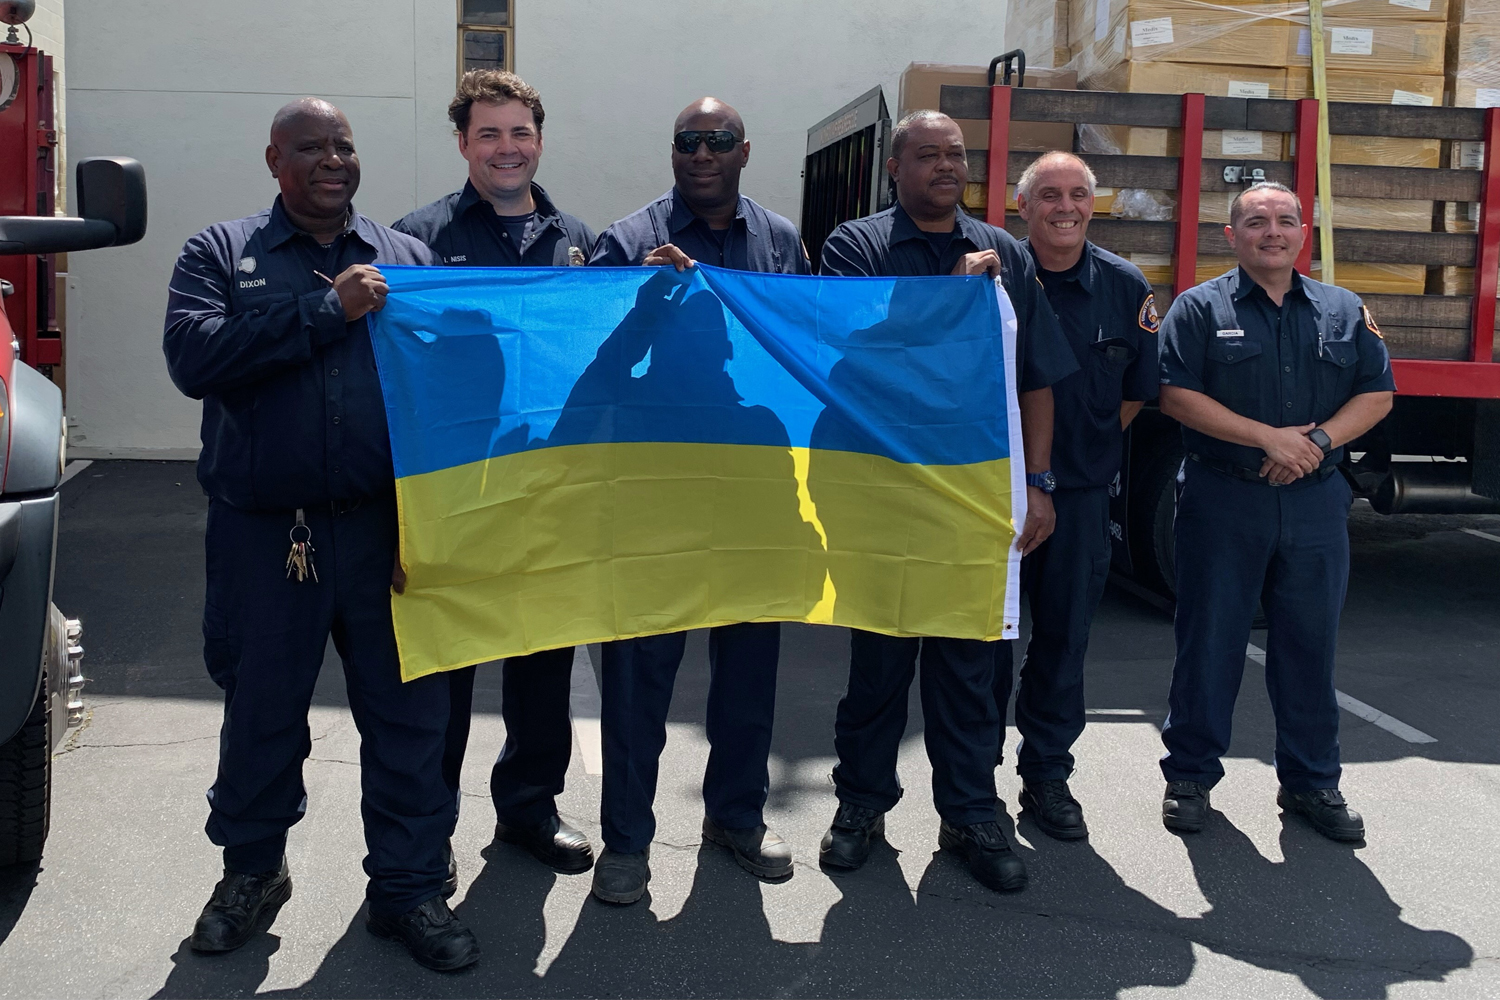 The Los Angeles County Fire Department (LACoFD) continues to assist with the local and national effort to gather more donated surplus equipment and medical supplies to help first responders in the country of Ukraine.